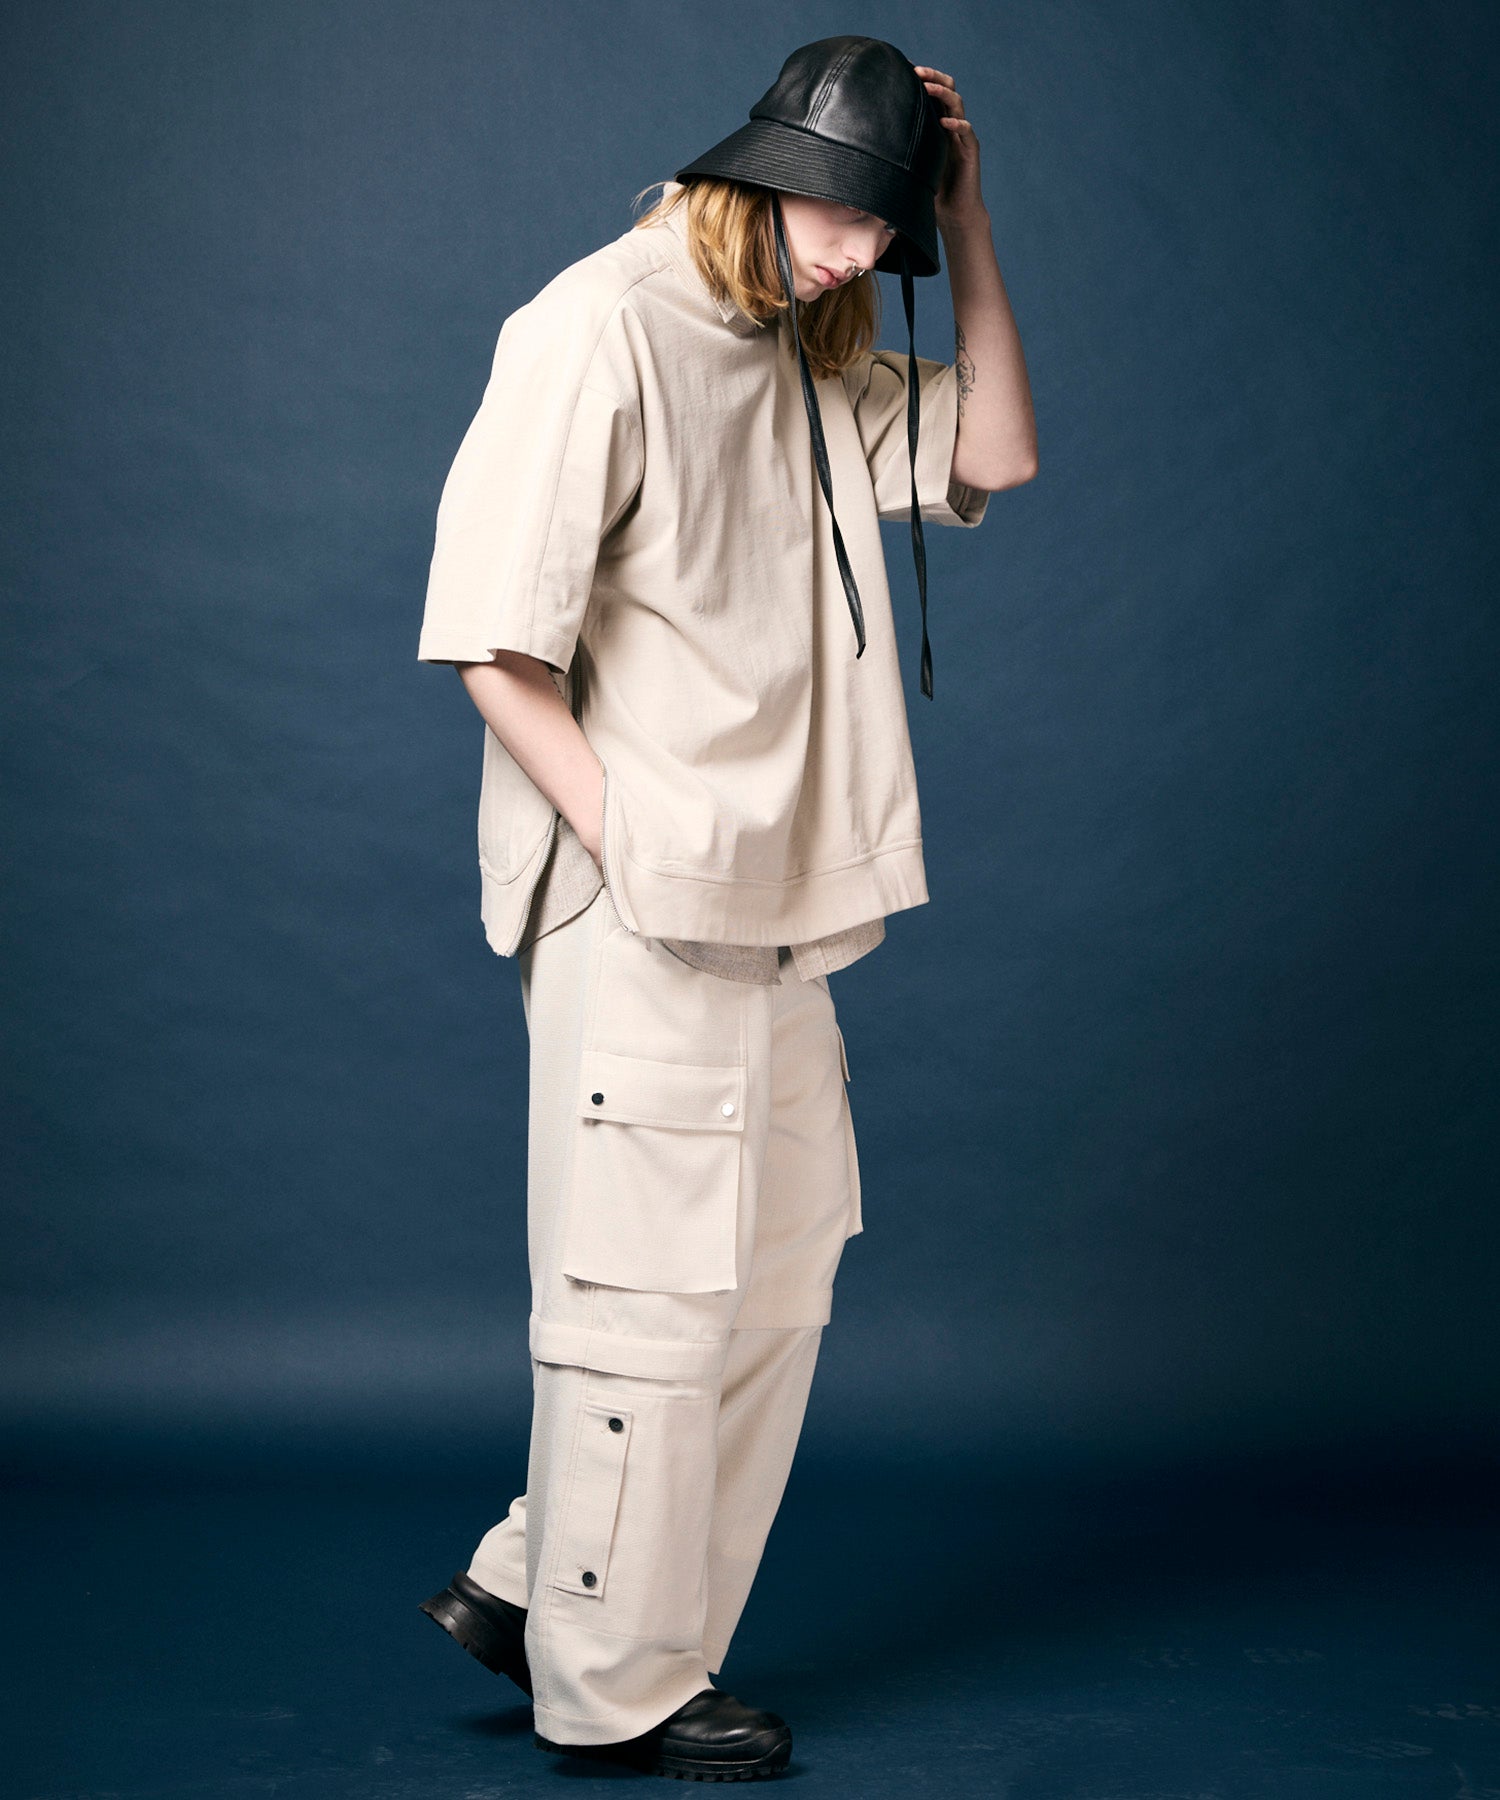 【LIMITED EDITION】Prime-Over Short Sleeve Shirt